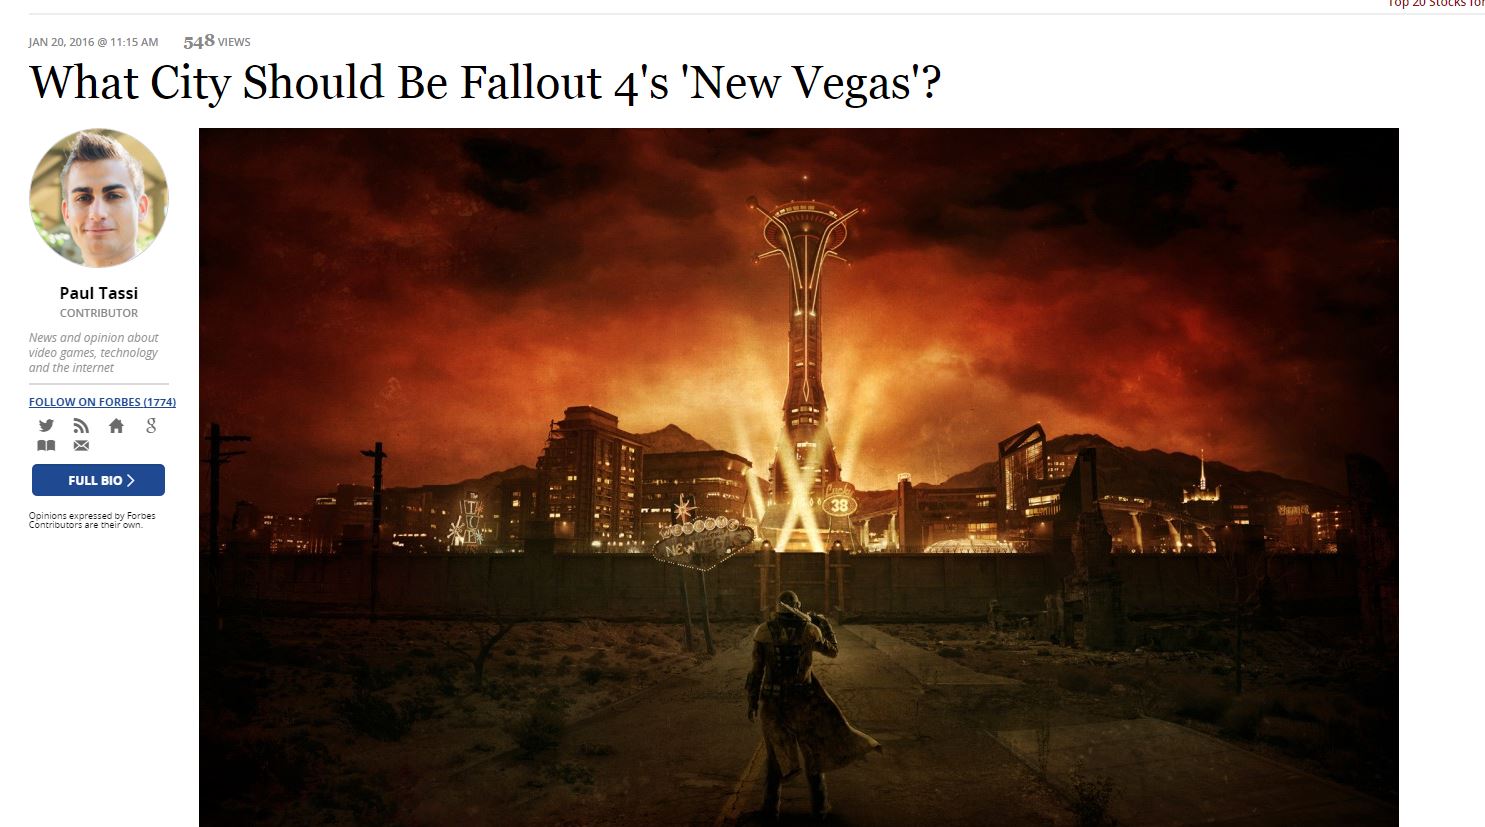 Fans’ Intense Love For Fallout: New Vegas Must Be Weird For People At Bethesda